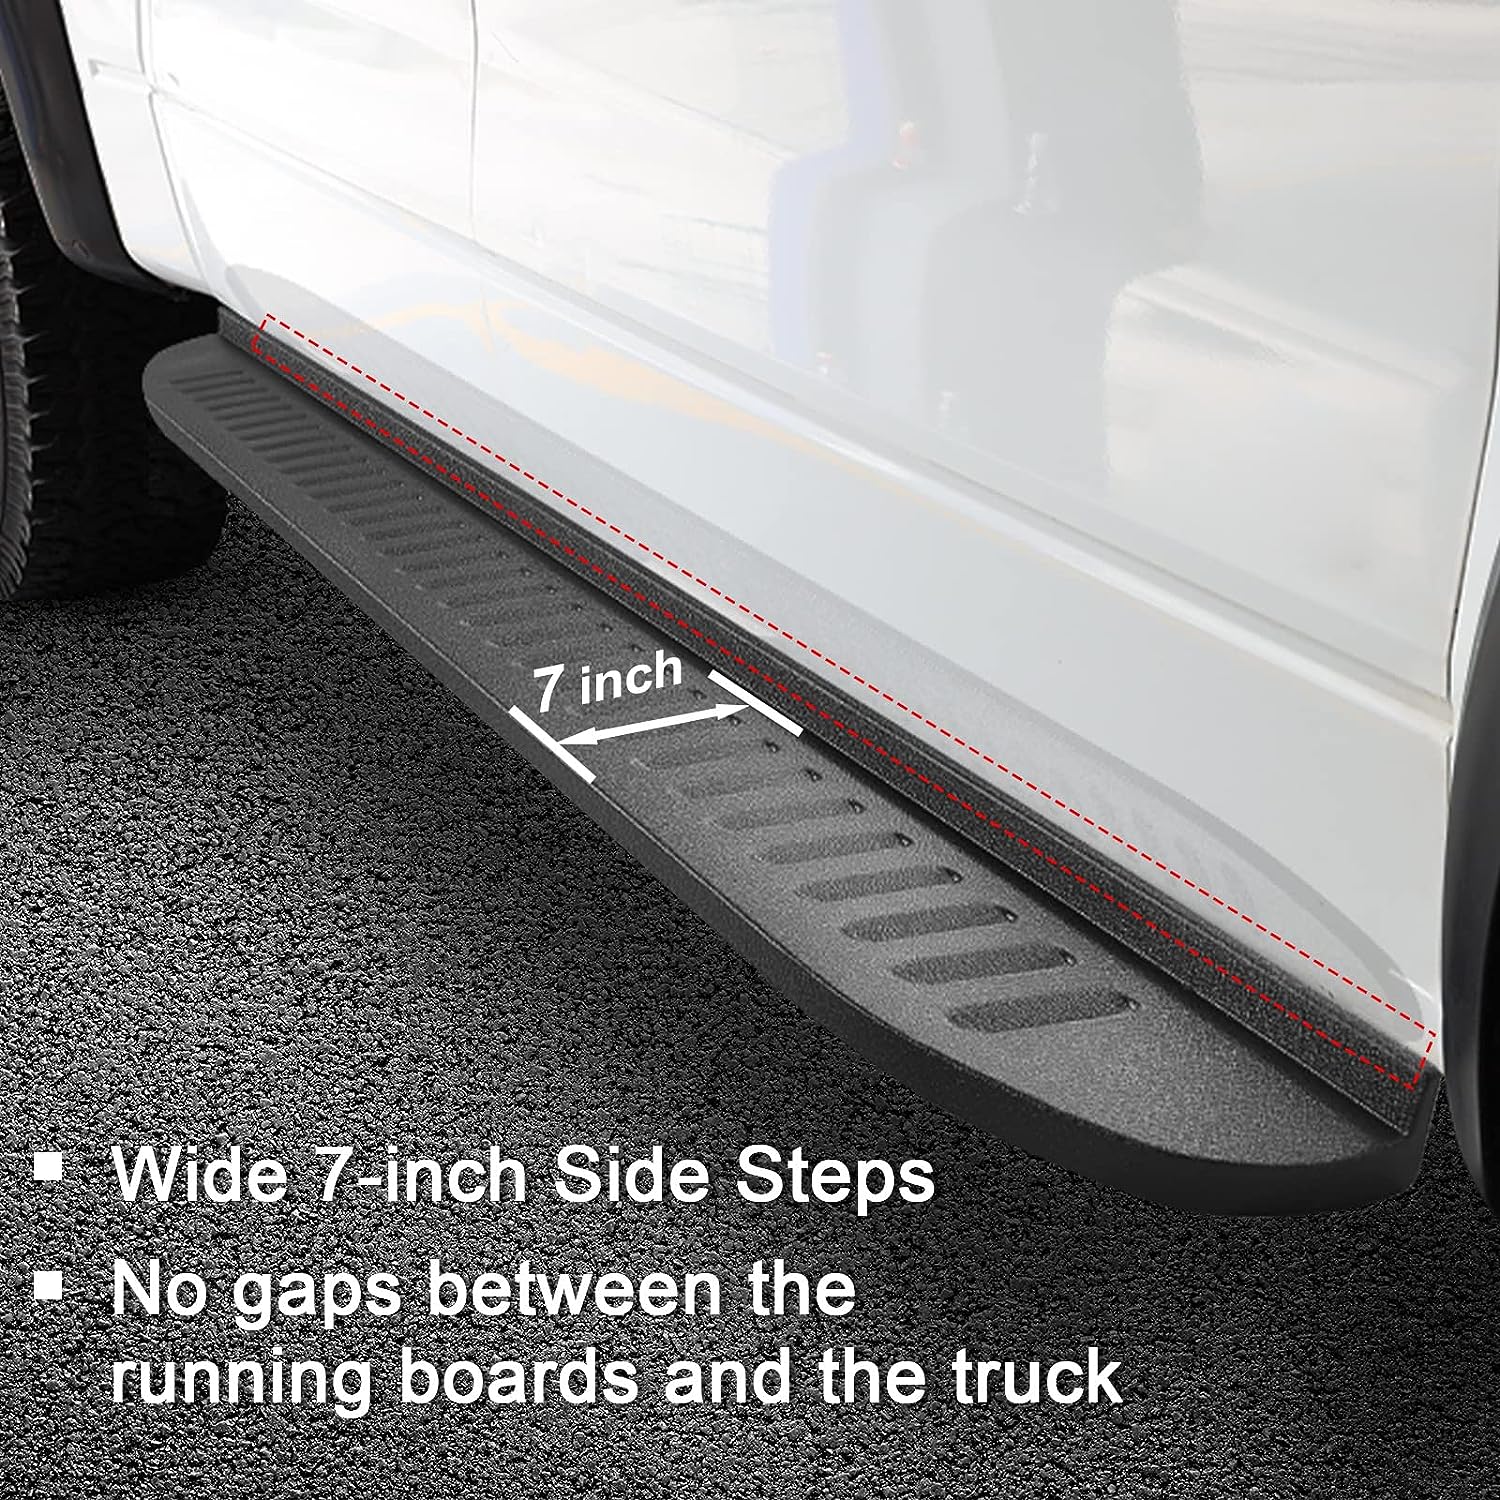 Running Boards Compatible with 2009-2018 Dodge Ram 1500 & 2010-2024 Ram 2500 3500 & 2019-2023 Dodge Ram 1500 Classic Crew Cab, Side Steps D7 Style.- COMNOVA AUTOPART